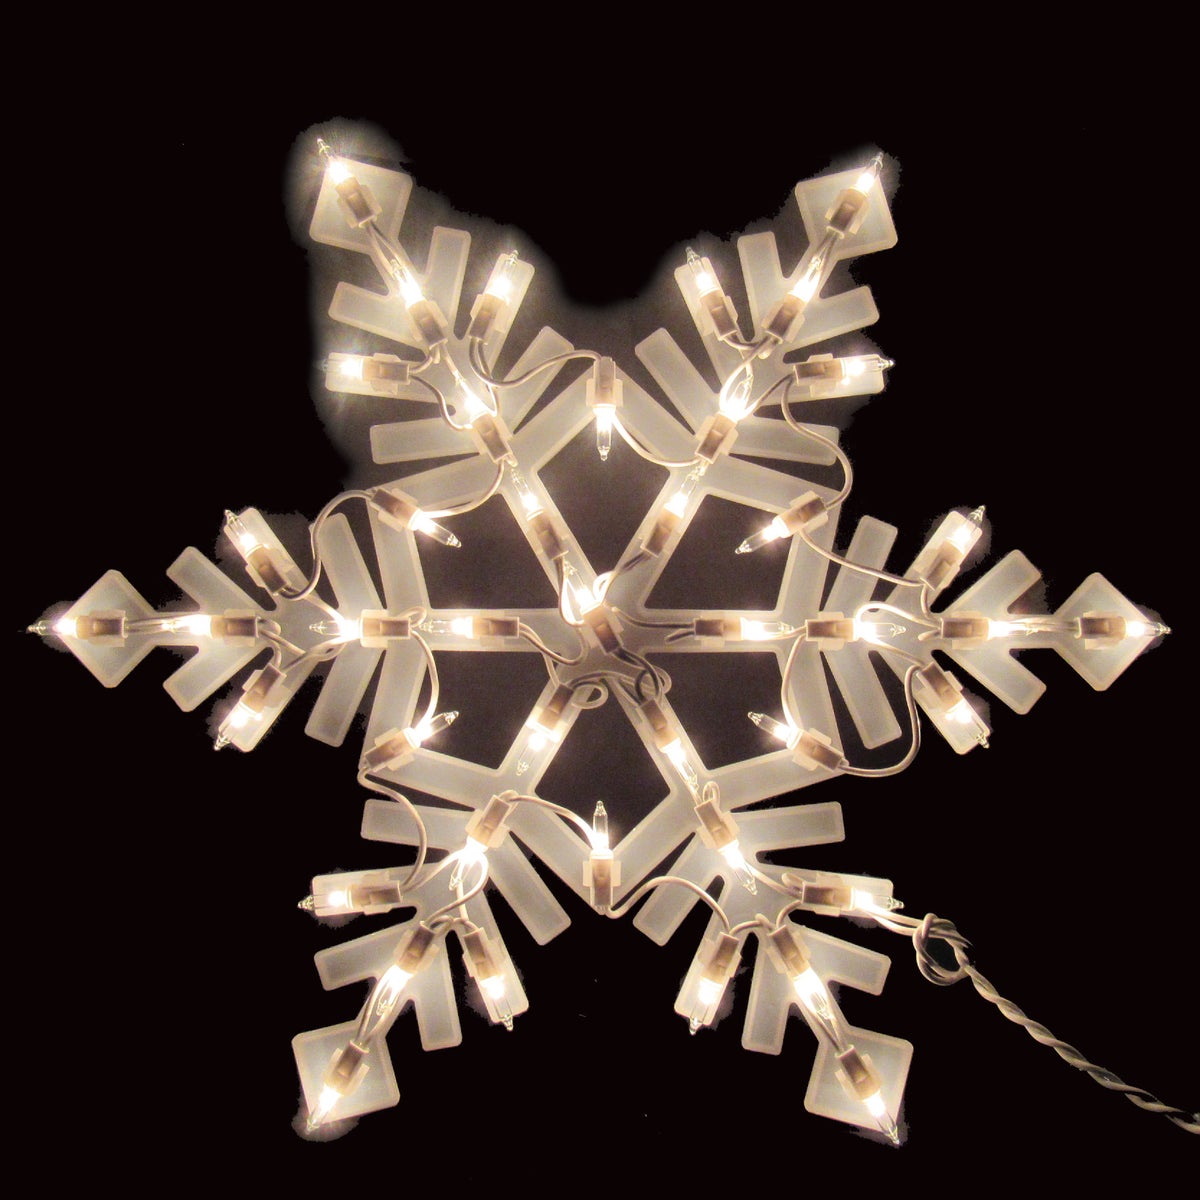 Item 900339, Lighted snowflake plaque ideal for holiday decorating.